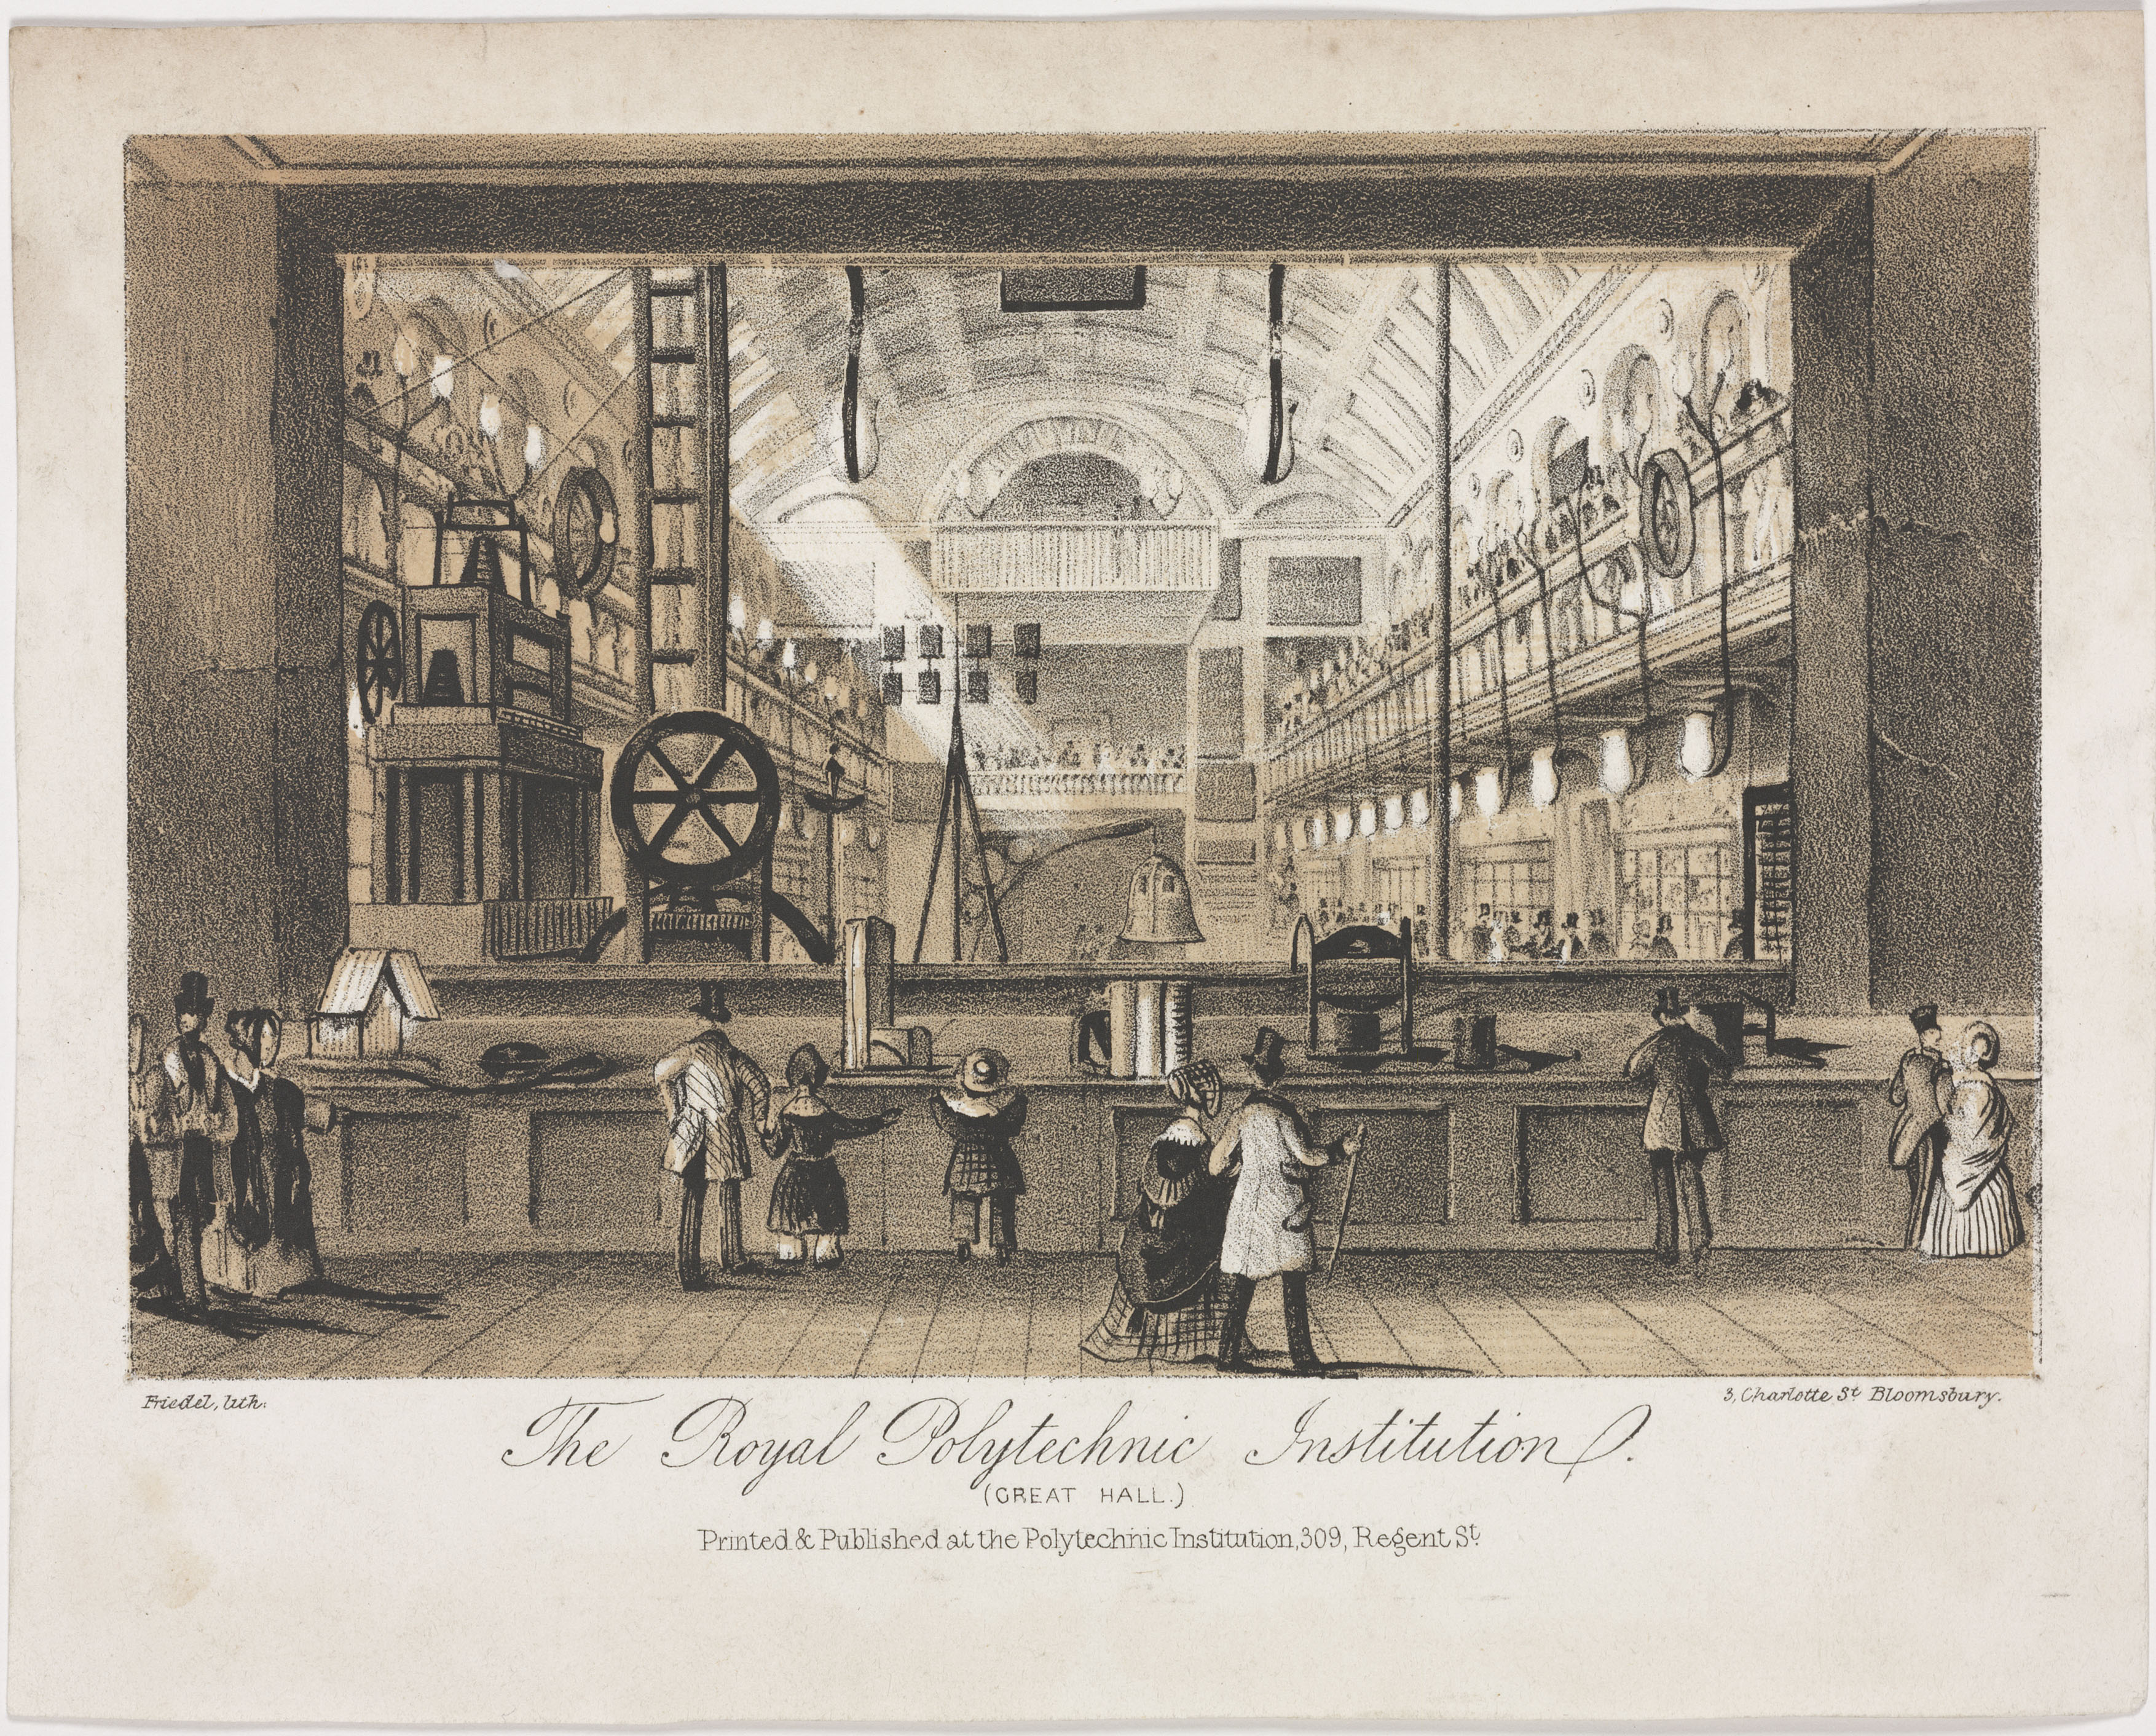 The Great Hall of the Royal Polytechnic Institution, London, c 1838. Science and Society Picture Library